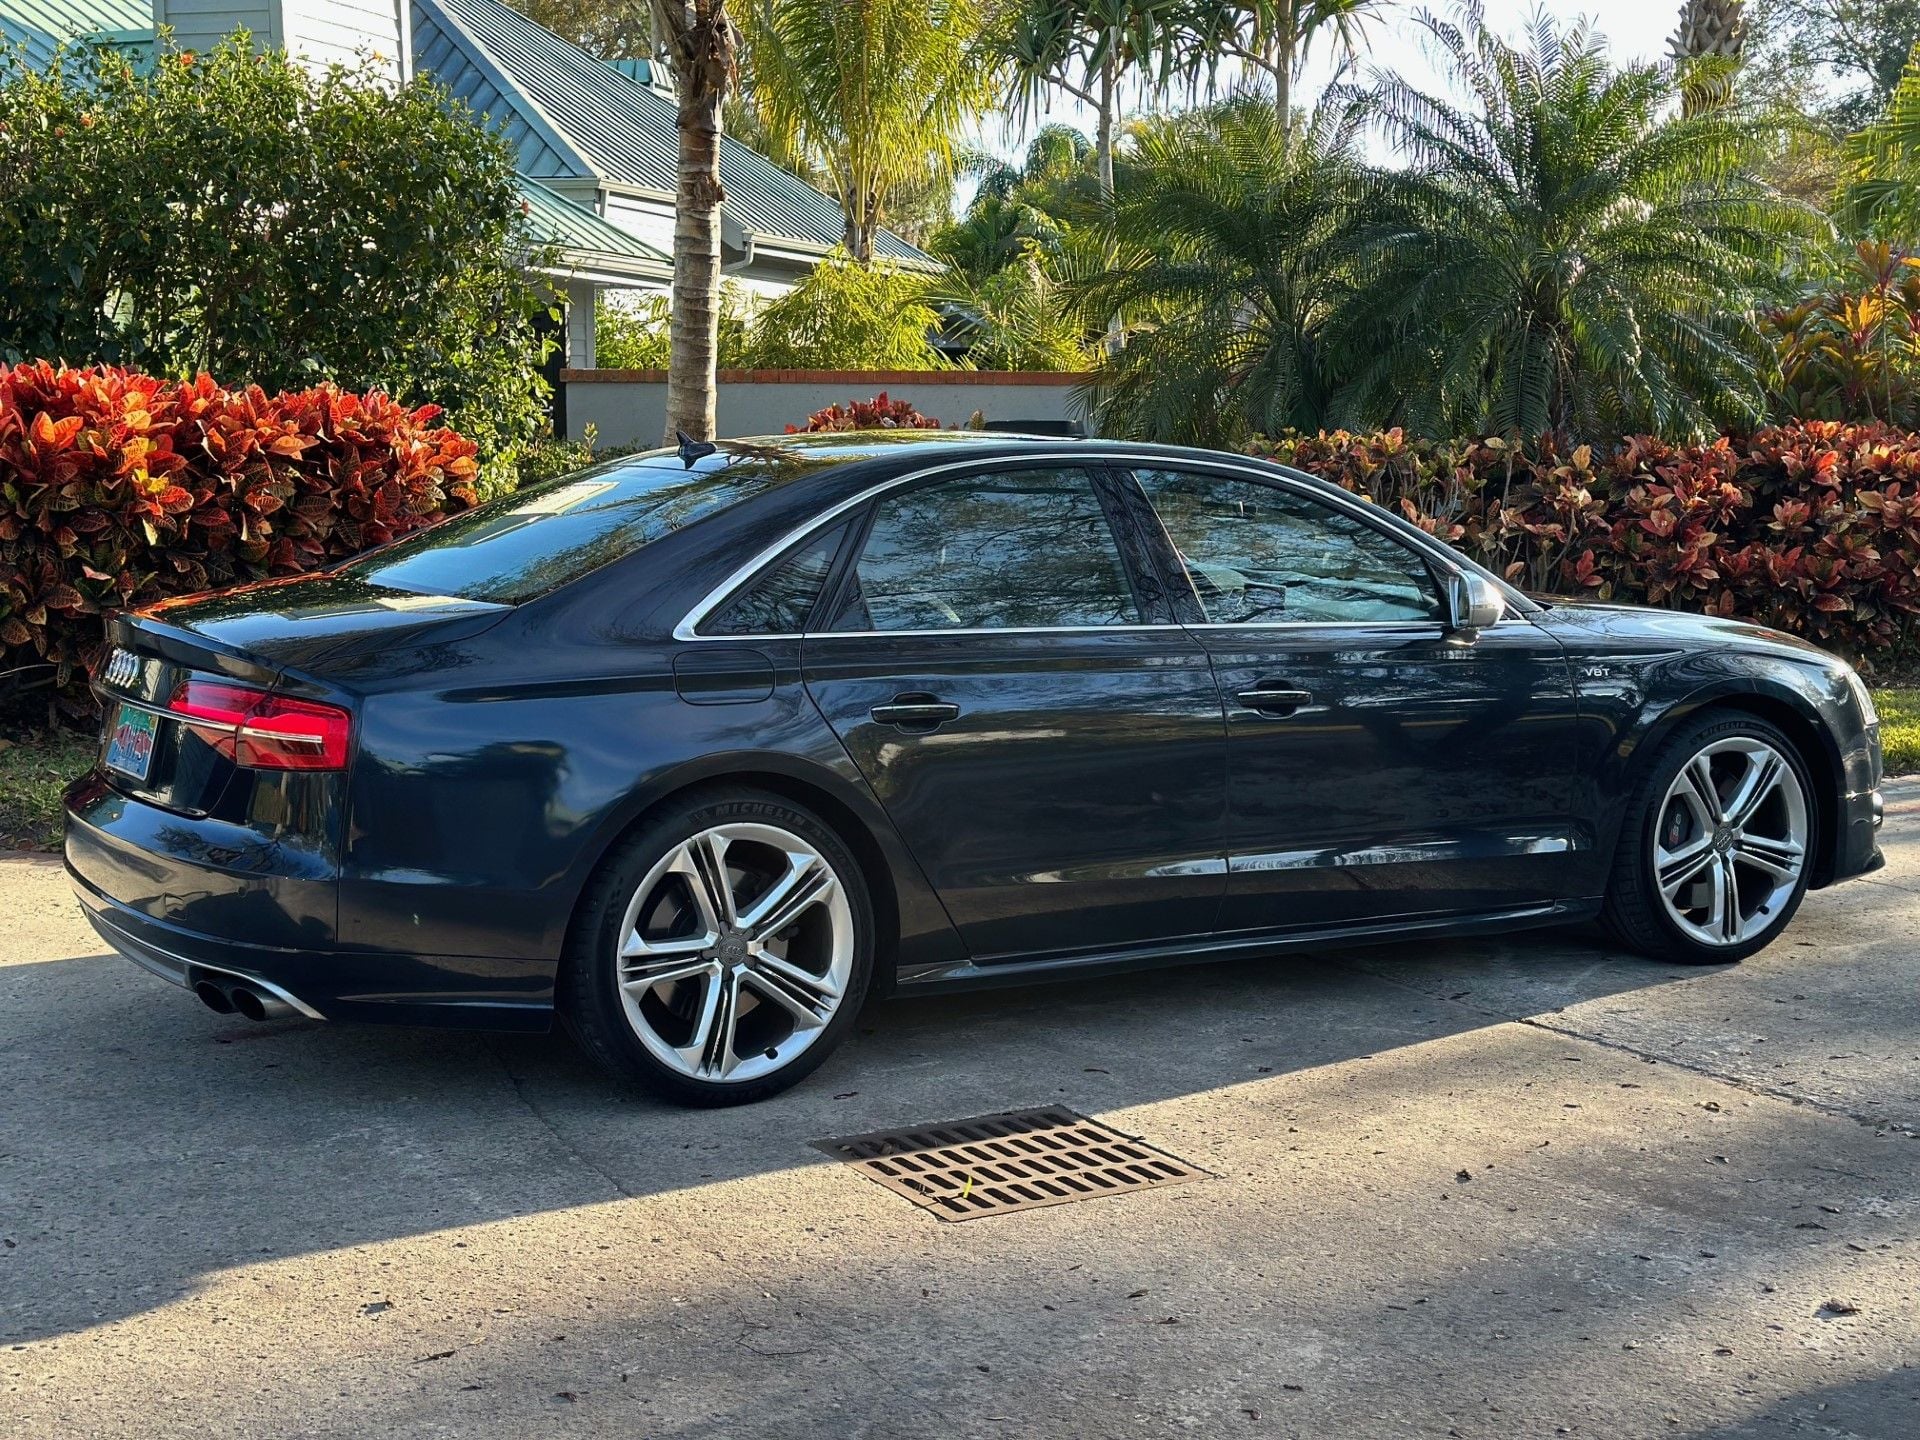 2015 Audi S8 - 2015 AUDI S8 $120K Sticker, LOW Mileage, NO Accidents, CLEAN Car Fax, Garage Kept - Used - VIN WAUK2AFD2FN021685 - 8 cyl - AWD - Automatic - Sedan - Blue - St. Petersburg, FL 33710, United States